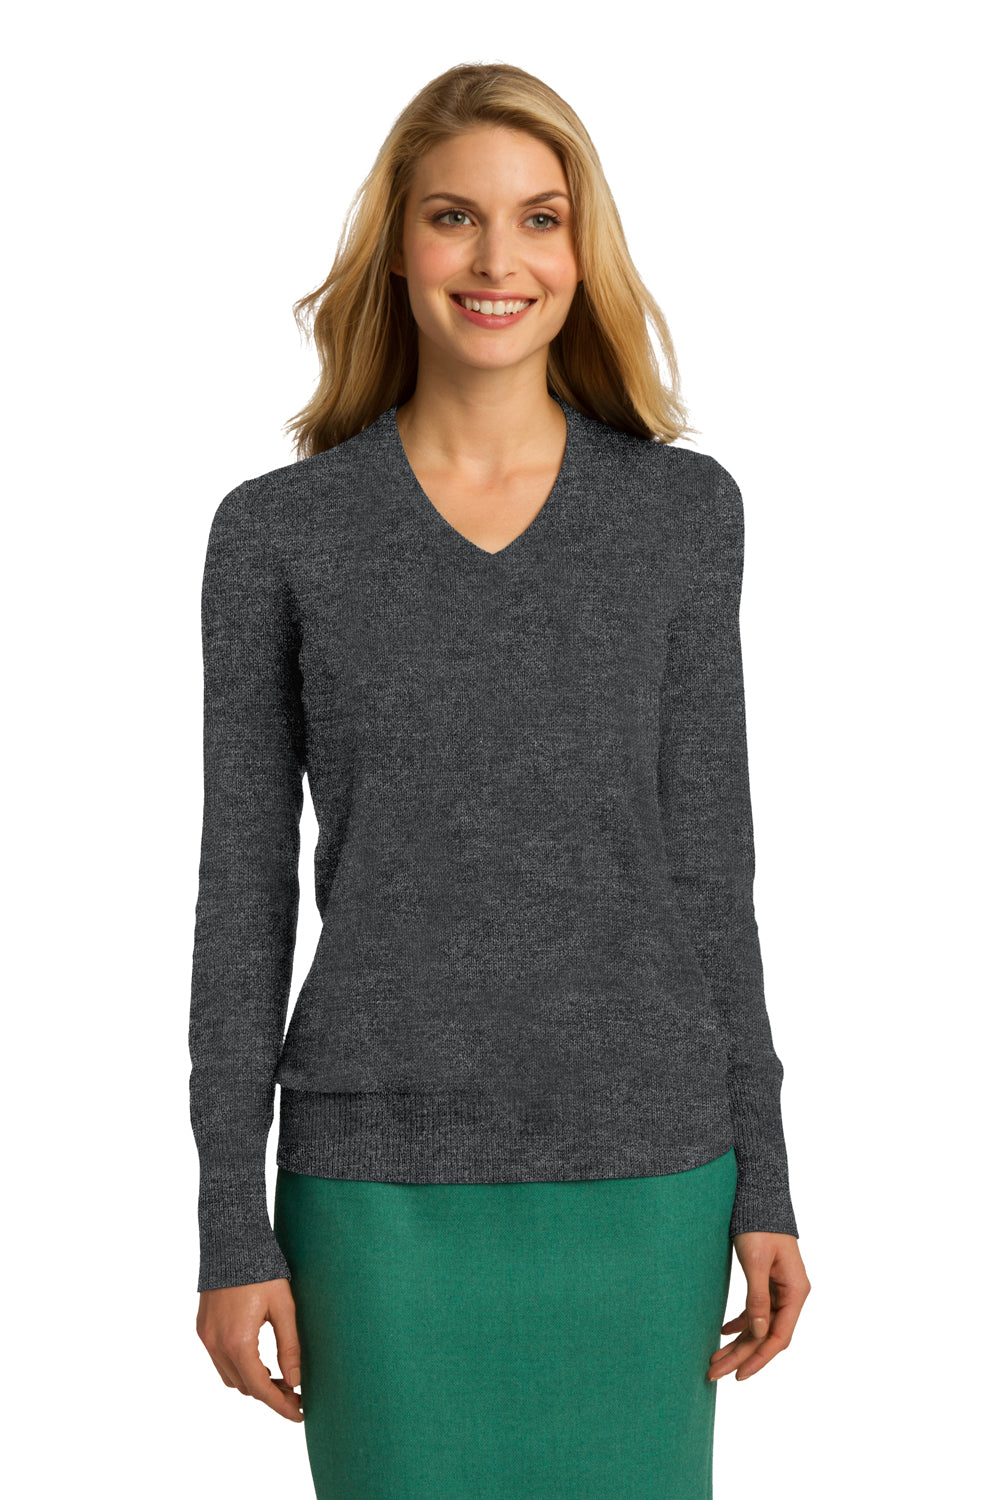 Port Authority LSW285 Womens Long Sleeve V-Neck Sweater Heather Charcoal Grey Front